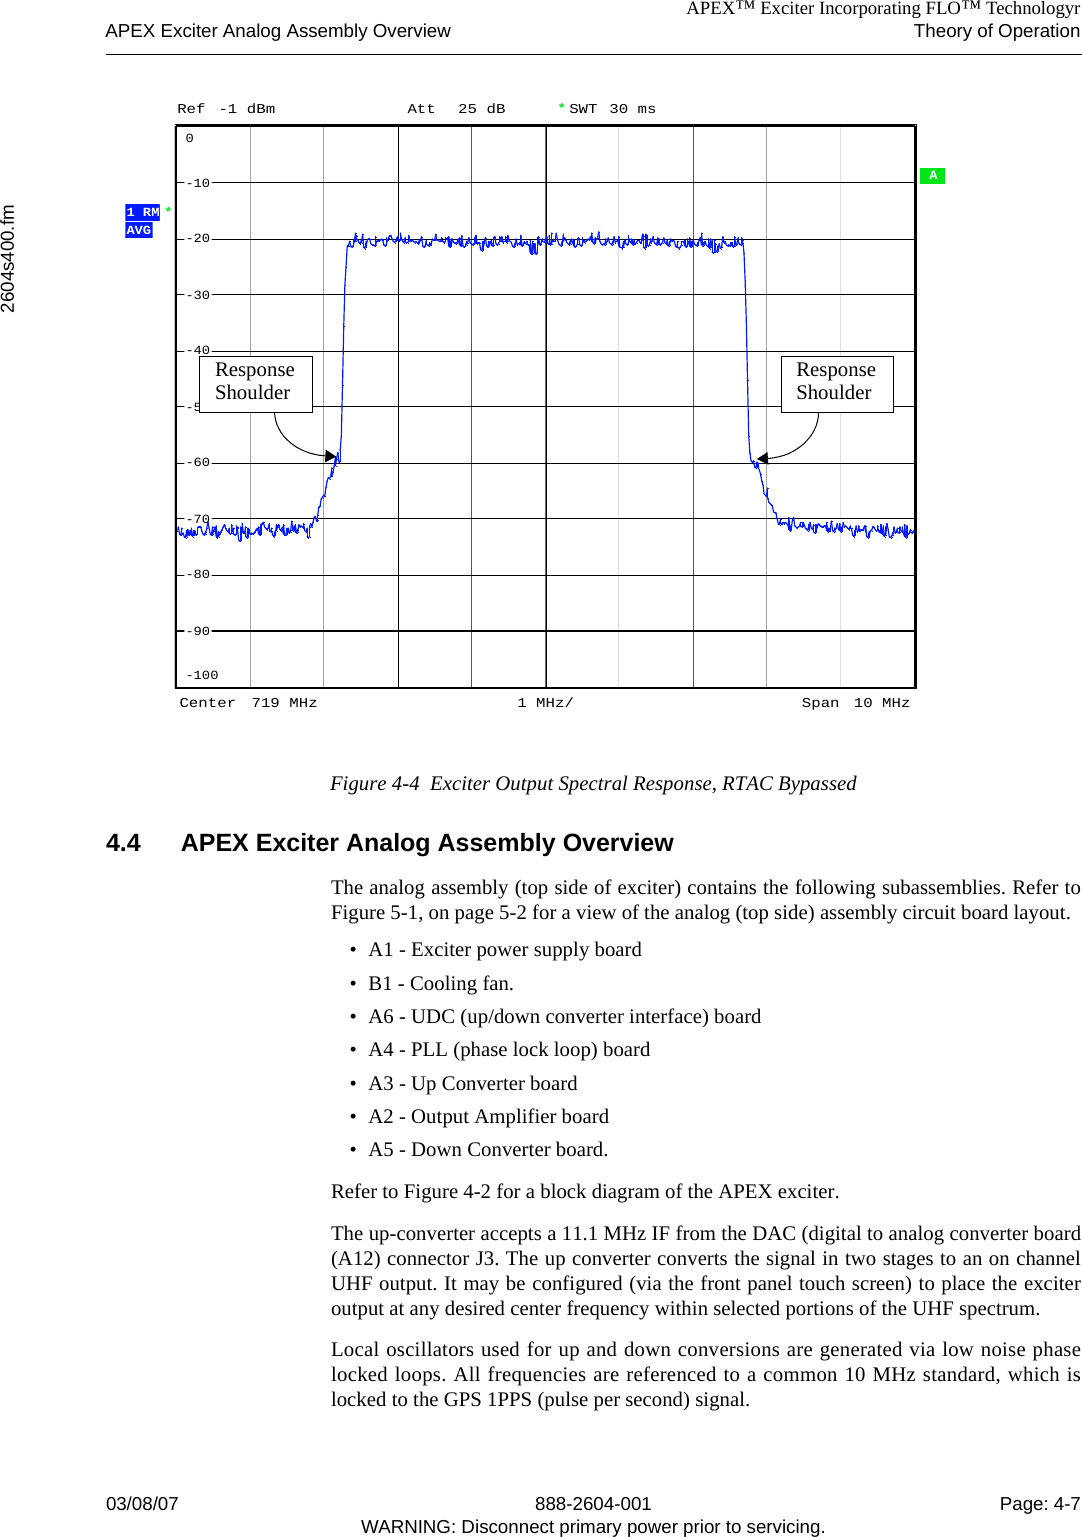 APEX™ Exciter Incorporating FLO™ TechnologyrAPEX Exciter Analog Assembly Overview Theory of Operation2604s400.fm03/08/07 888-2604-001 Page: 4-7WARNING: Disconnect primary power prior to servicing.Figure 4-4  Exciter Output Spectral Response, RTAC Bypassed4.4 APEX Exciter Analog Assembly OverviewThe analog assembly (top side of exciter) contains the following subassemblies. Refer toFigure 5-1, on page 5-2 for a view of the analog (top side) assembly circuit board layout.• A1 - Exciter power supply board • B1 - Cooling fan.• A6 - UDC (up/down converter interface) board• A4 - PLL (phase lock loop) board• A3 - Up Converter board• A2 - Output Amplifier board• A5 - Down Converter board. Refer to Figure 4-2 for a block diagram of the APEX exciter. The up-converter accepts a 11.1 MHz IF from the DAC (digital to analog converter board(A12) connector J3. The up converter converts the signal in two stages to an on channelUHF output. It may be configured (via the front panel touch screen) to place the exciteroutput at any desired center frequency within selected portions of the UHF spectrum. Local oscillators used for up and down conversions are generated via low noise phaselocked loops. All frequencies are referenced to a common 10 MHz standard, which islocked to the GPS 1PPS (pulse per second) signal.  A SWT  30 ms*AVG*1 RMAtt  25 dBRef -1 dBmCenter 719 MHz Span 10 MHz1 MHz/-100-90-80-70-60-50-40-30-20-100ResponseShoulder ResponseShoulder